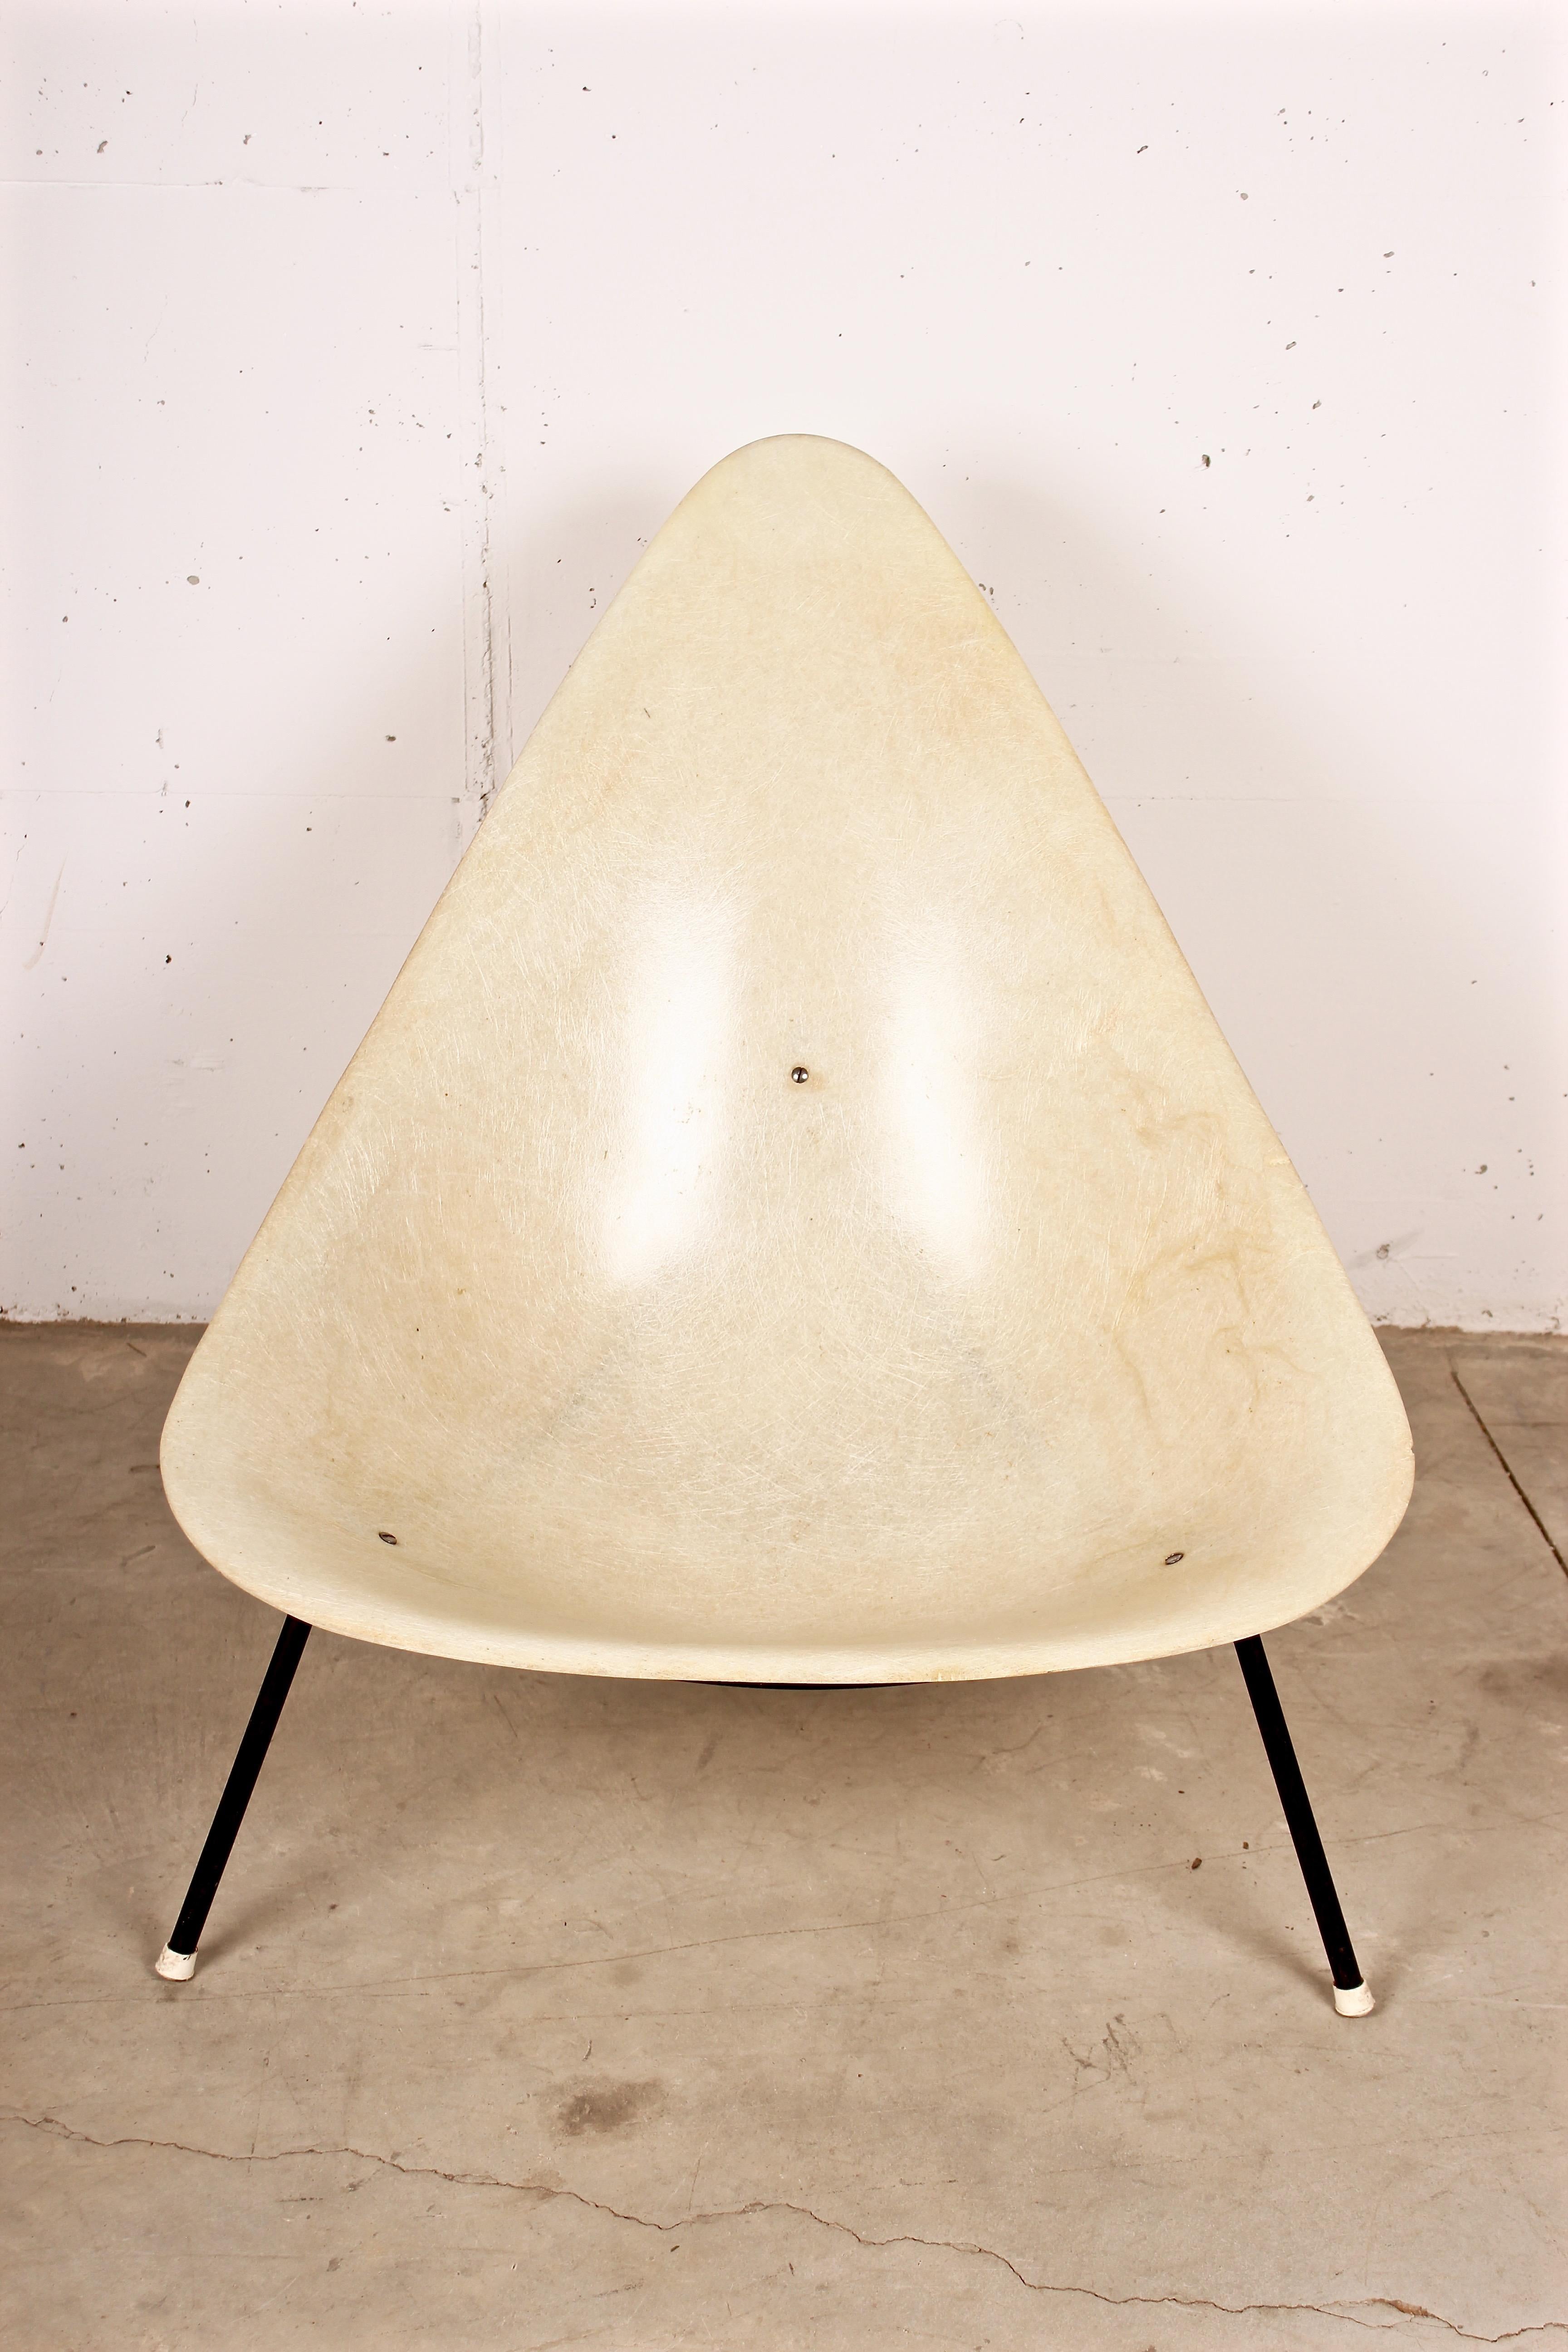 Mid-20th Century Mérat Early French Fiberglass Easy Chair Attributed to Rj Caillette France, 1956